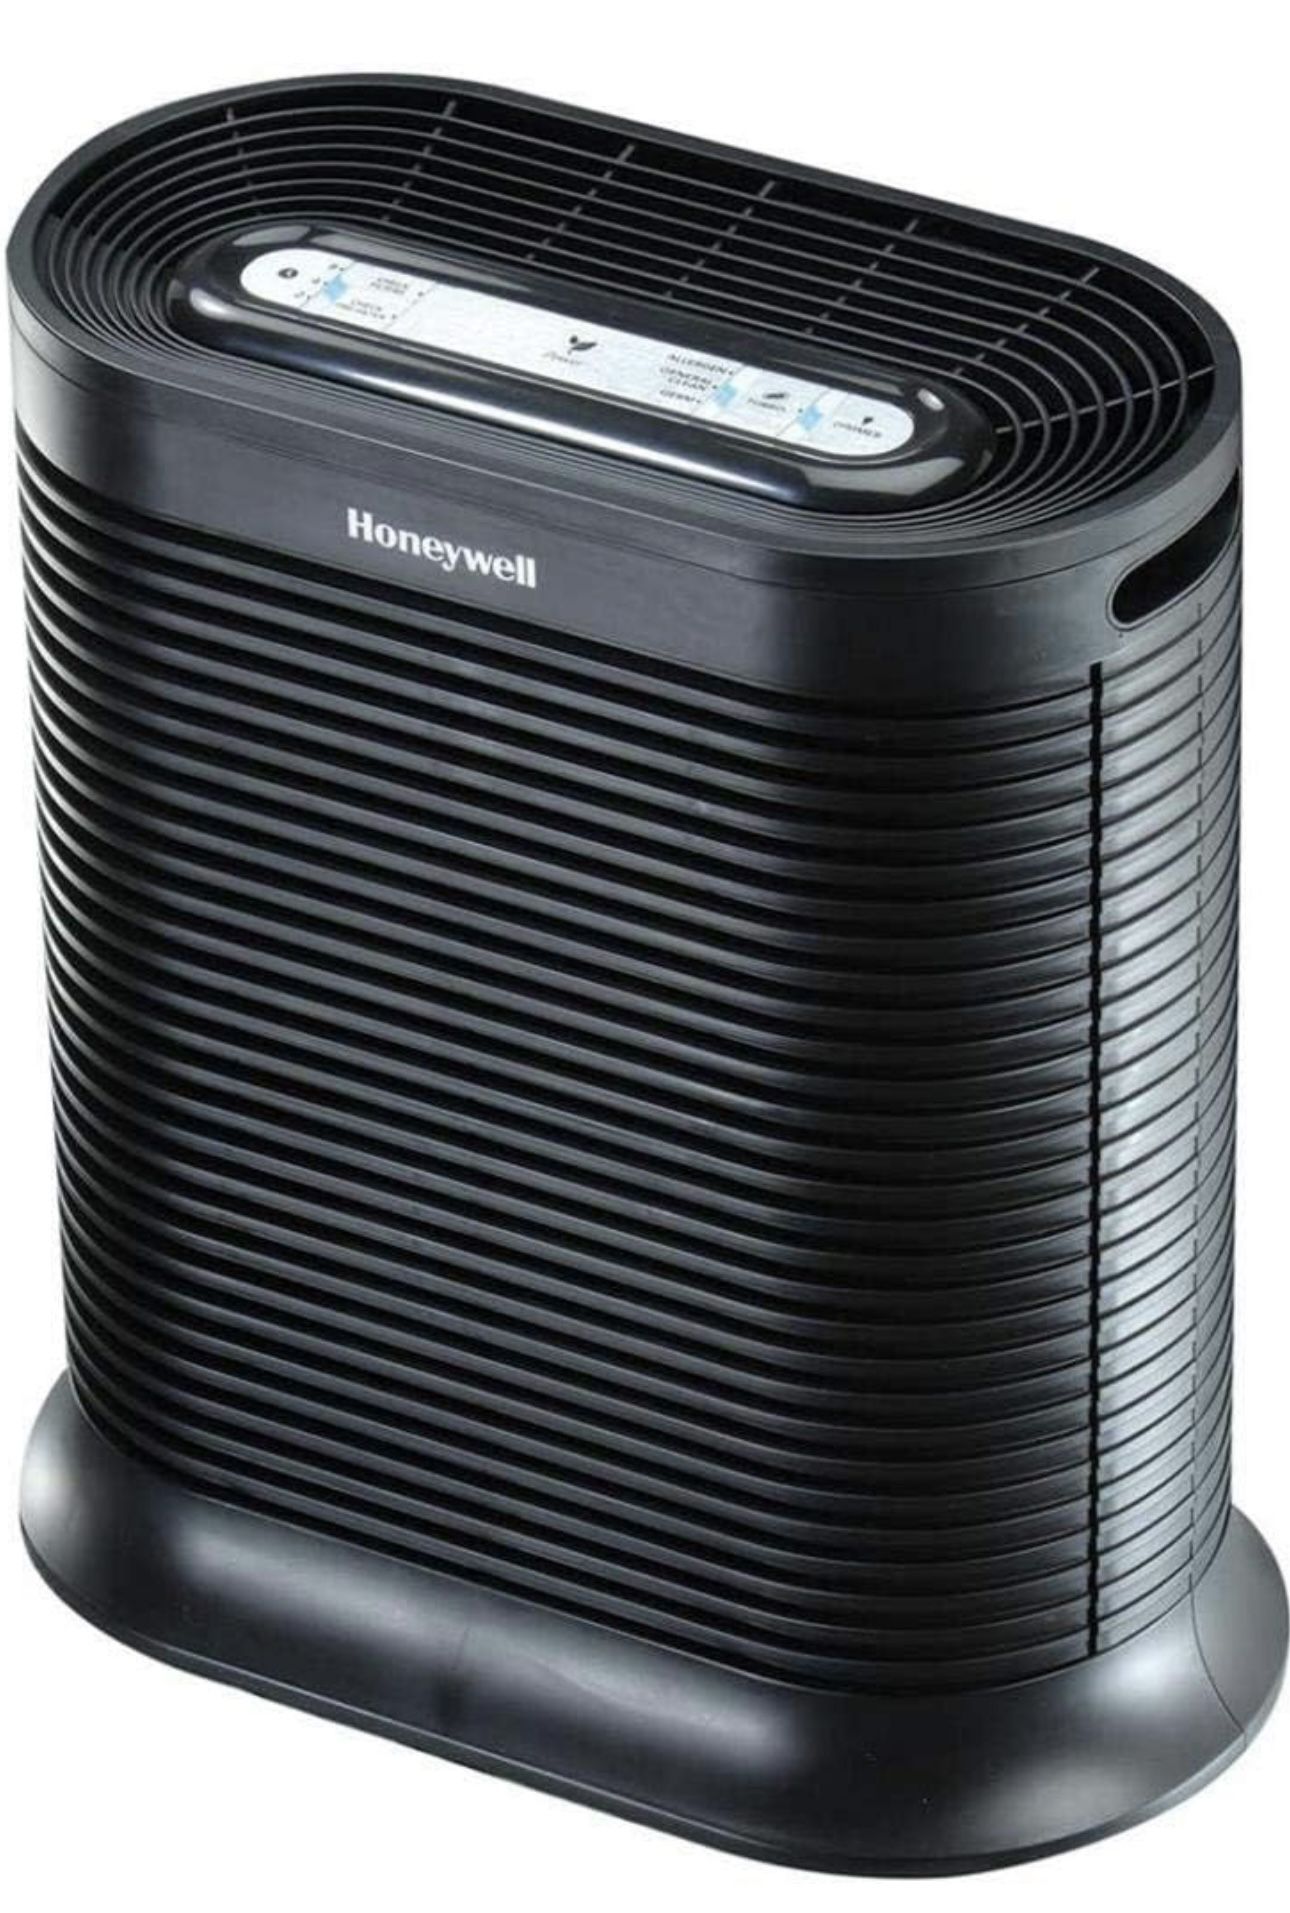 Honeywell HPA200 HEPA Air Purifier for Large Rooms - Microscopic Airborne Allergen+ Reducer, Cleans Up To 1500 Sq Ft in 1 Hour - Wildfire/Smoke, Polle